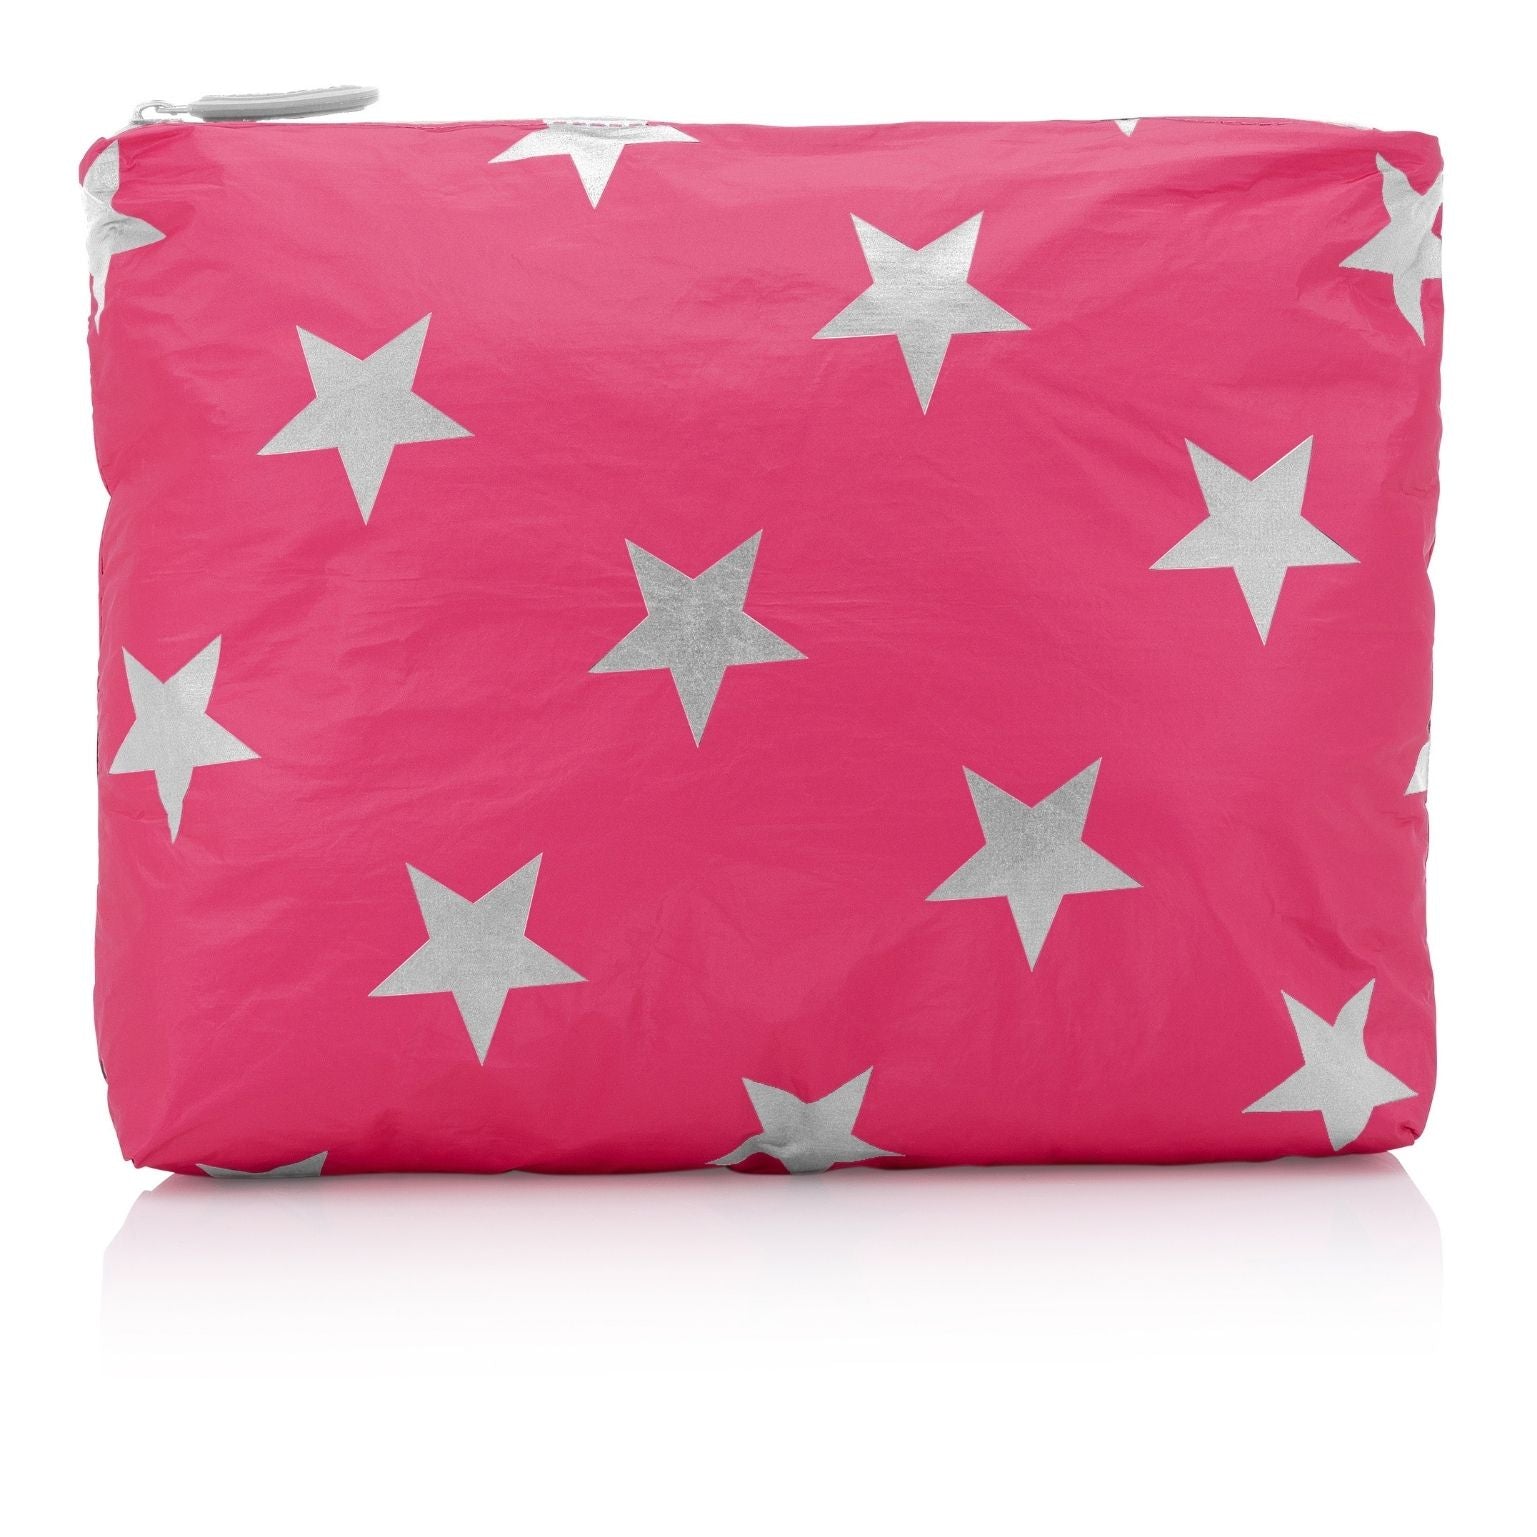 Medium Zipper Pack in Paradise Pink with Multi Silver Stars